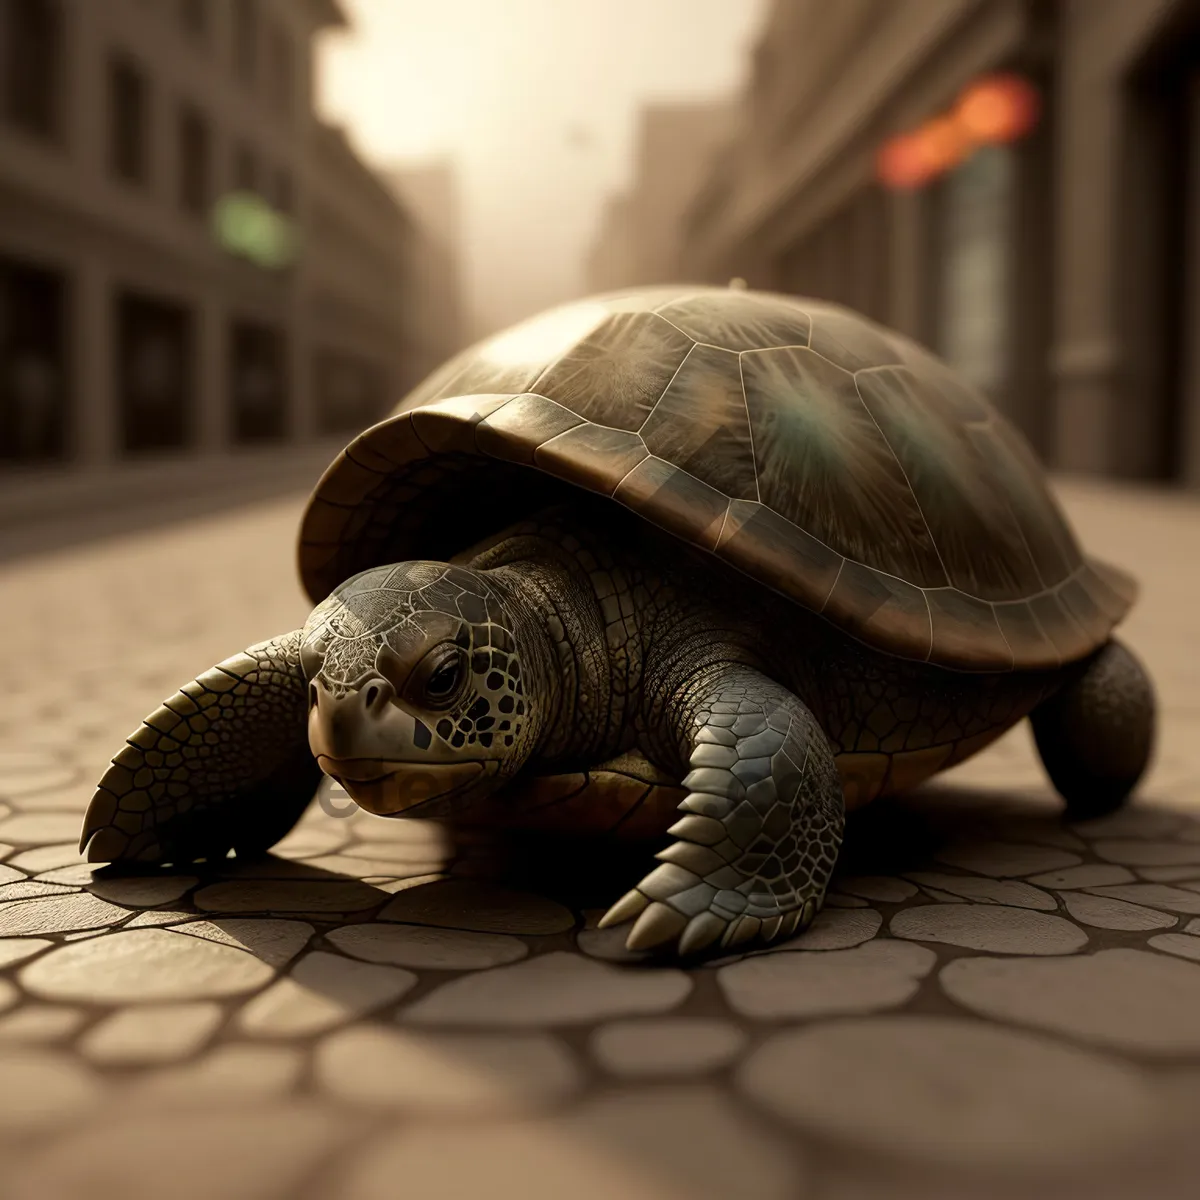 Picture of Turtle's Protective Shell: Slow and Cute Reptilian Guardian